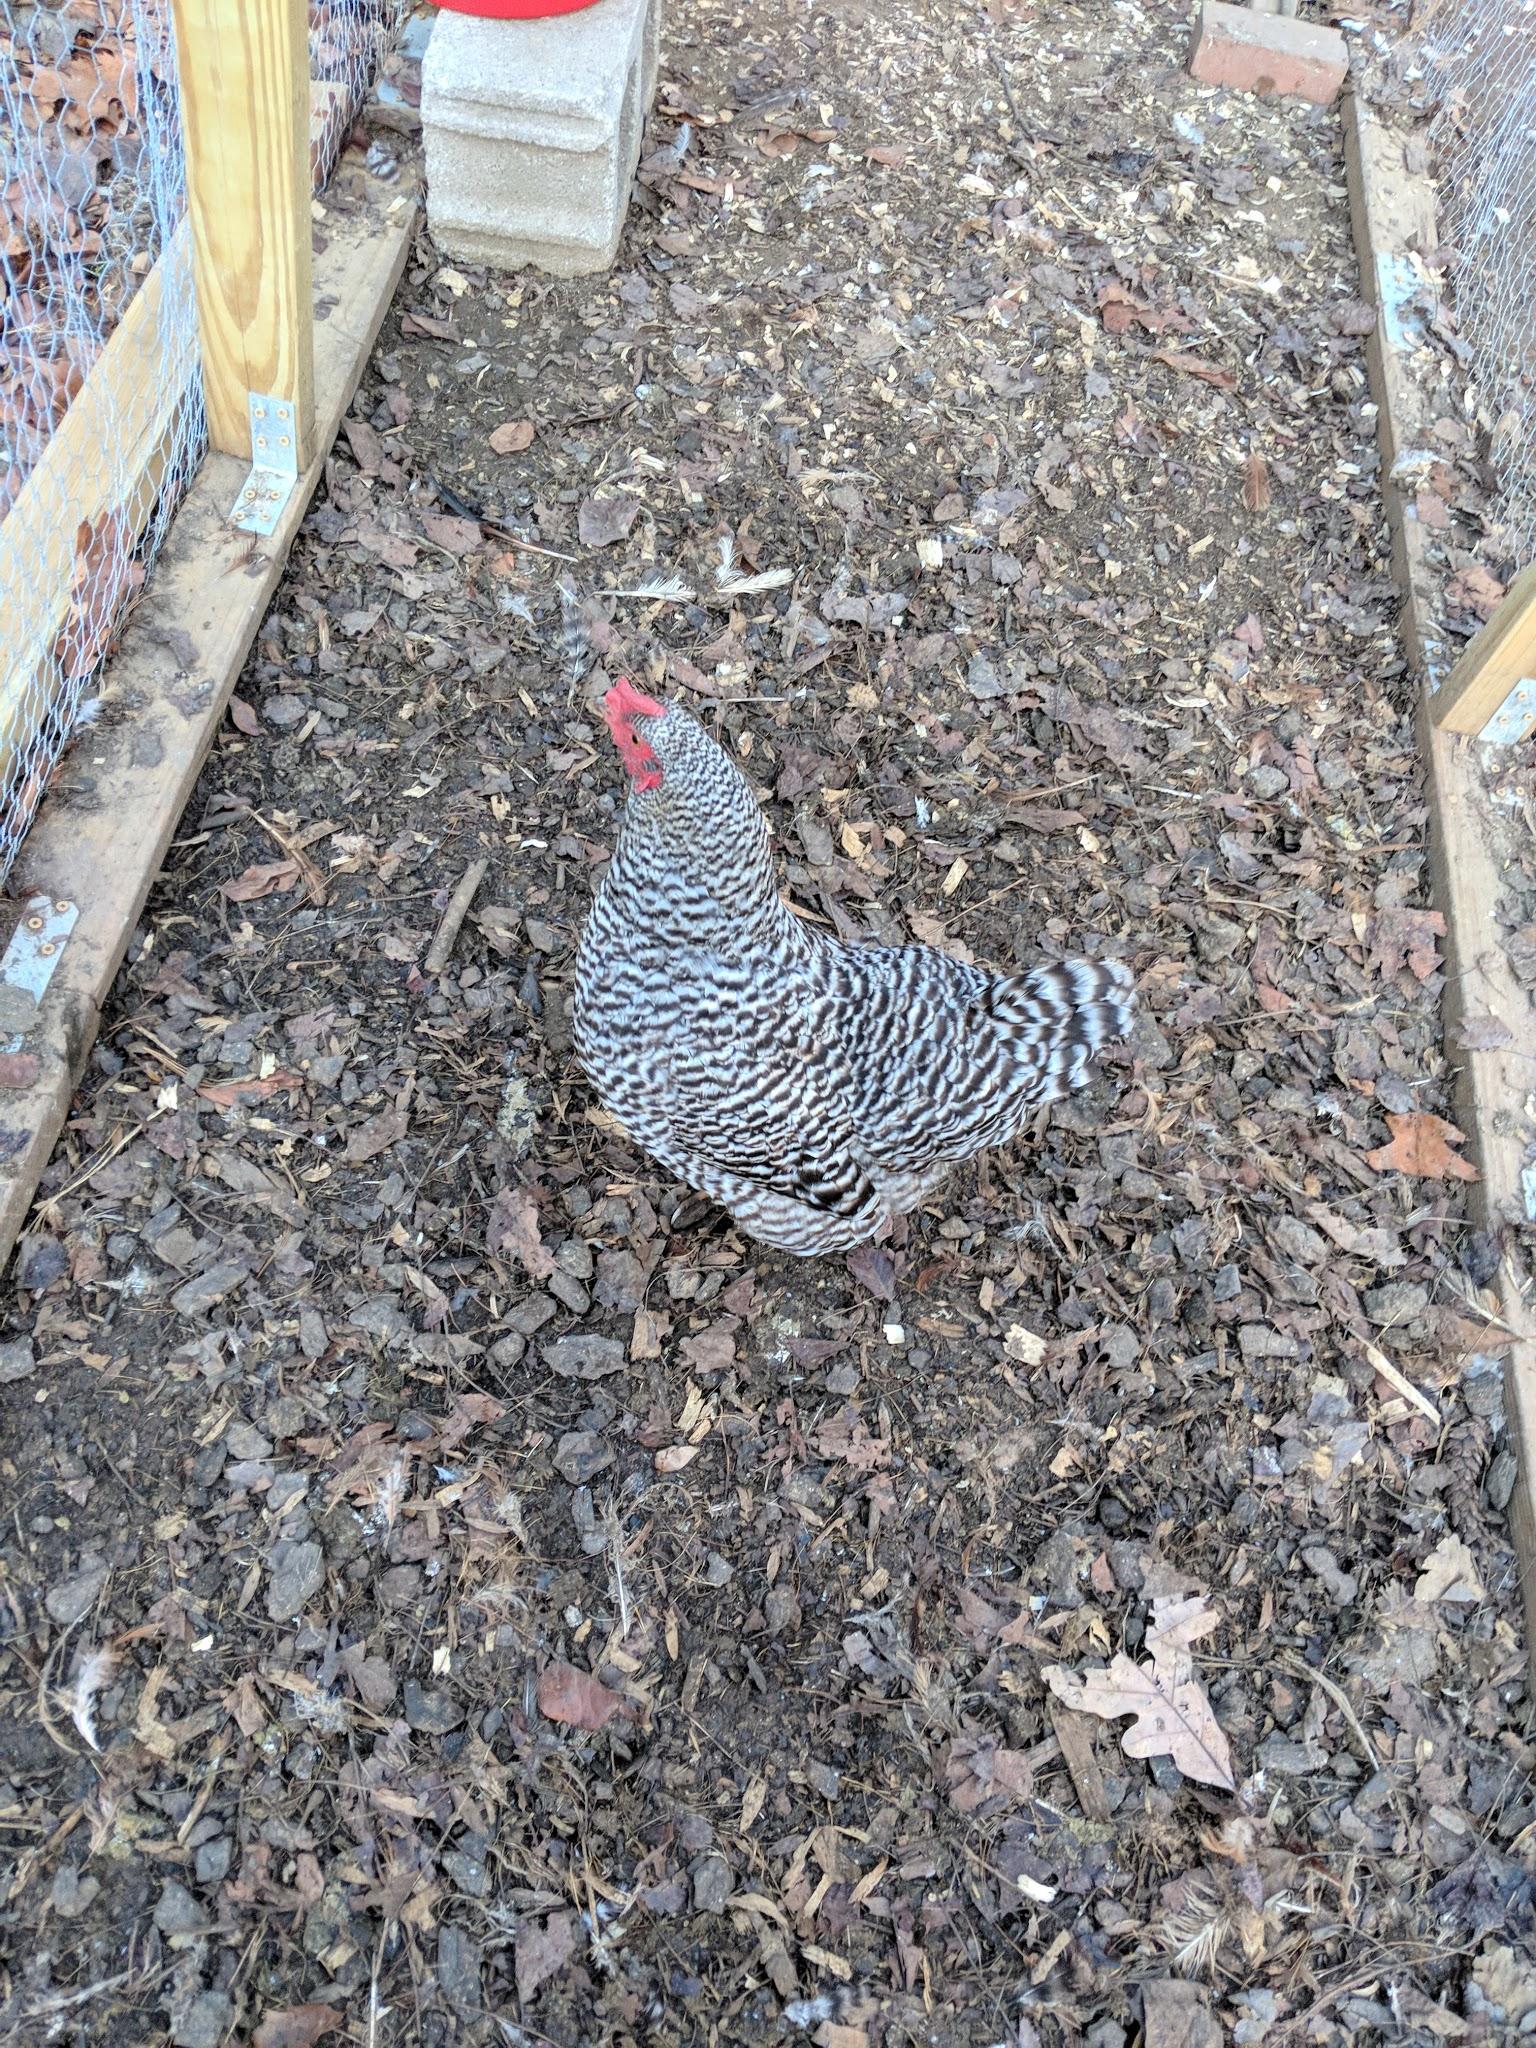 Barred Rock hen returning to the coop